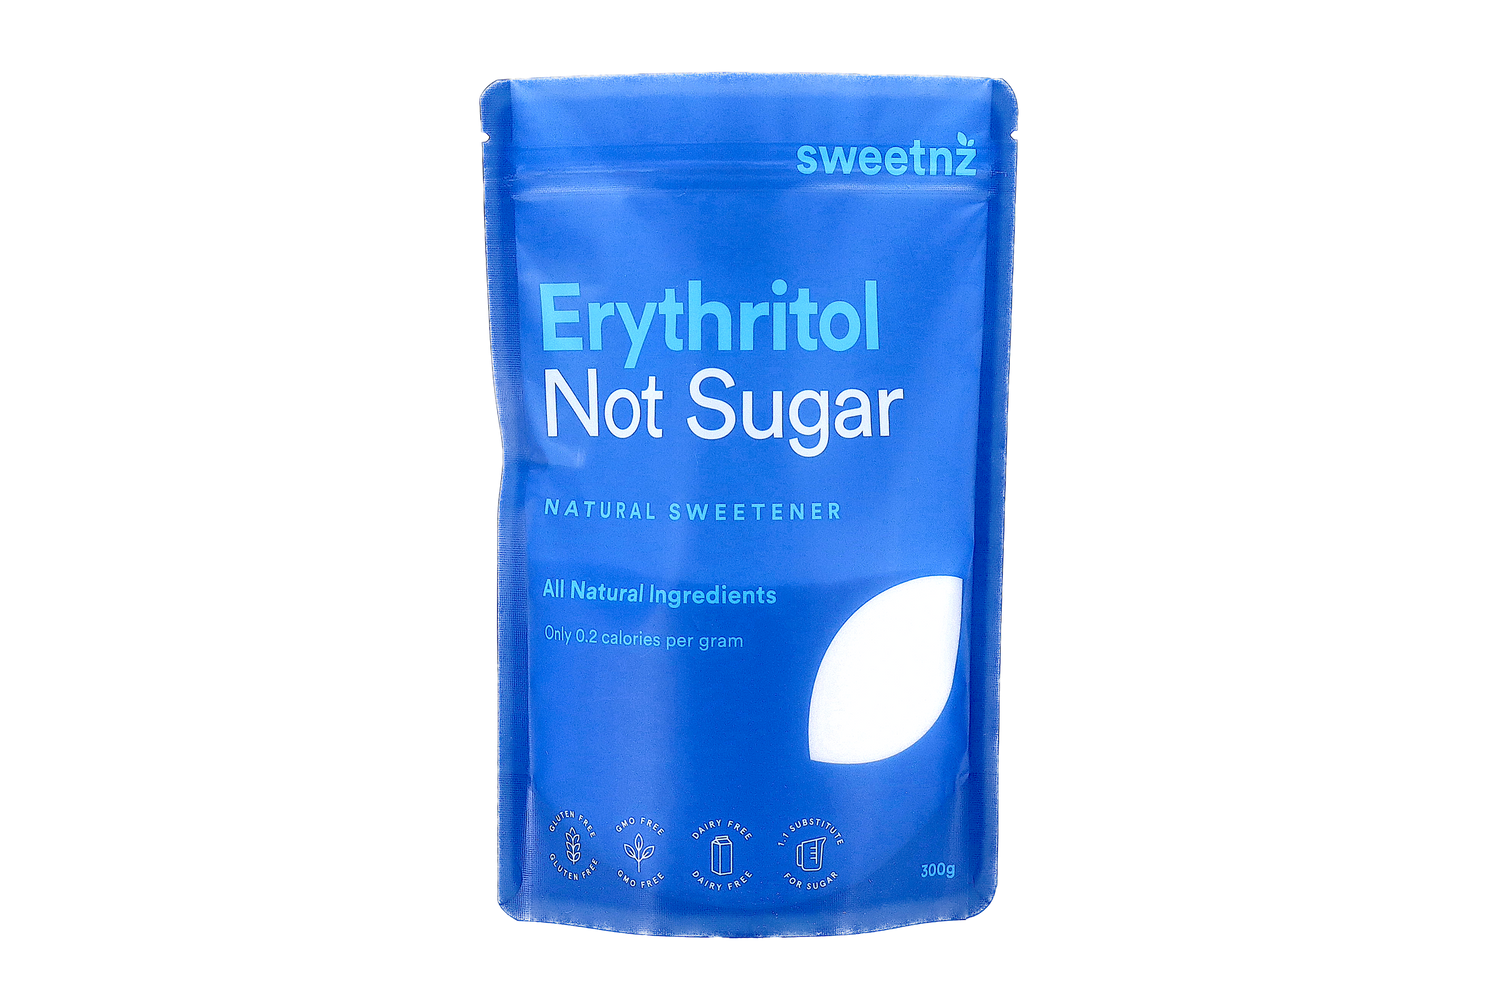 Erythritol 300g. 70% the sweetness of table sugar, but without the calories!